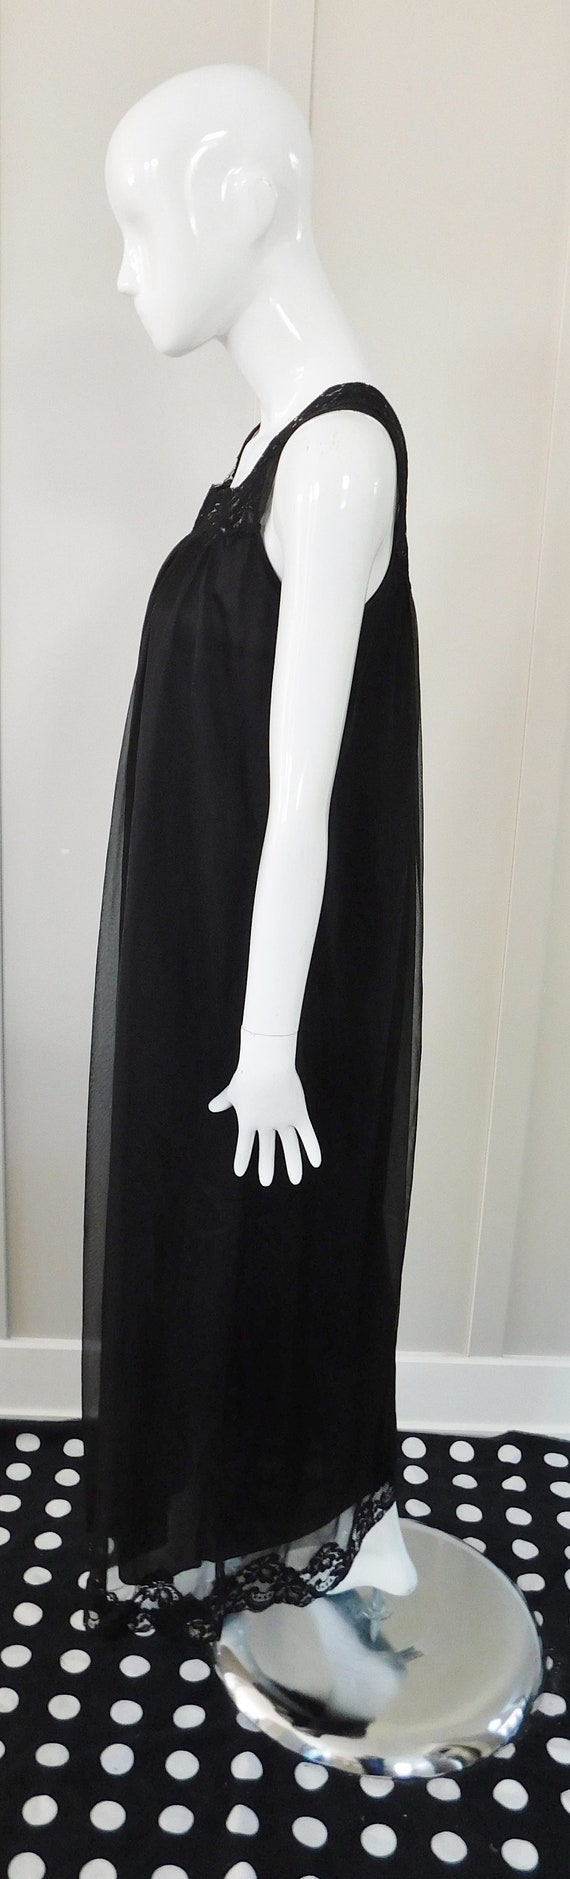 1960's Vintage French Maid Square Neck Nightgown - image 5